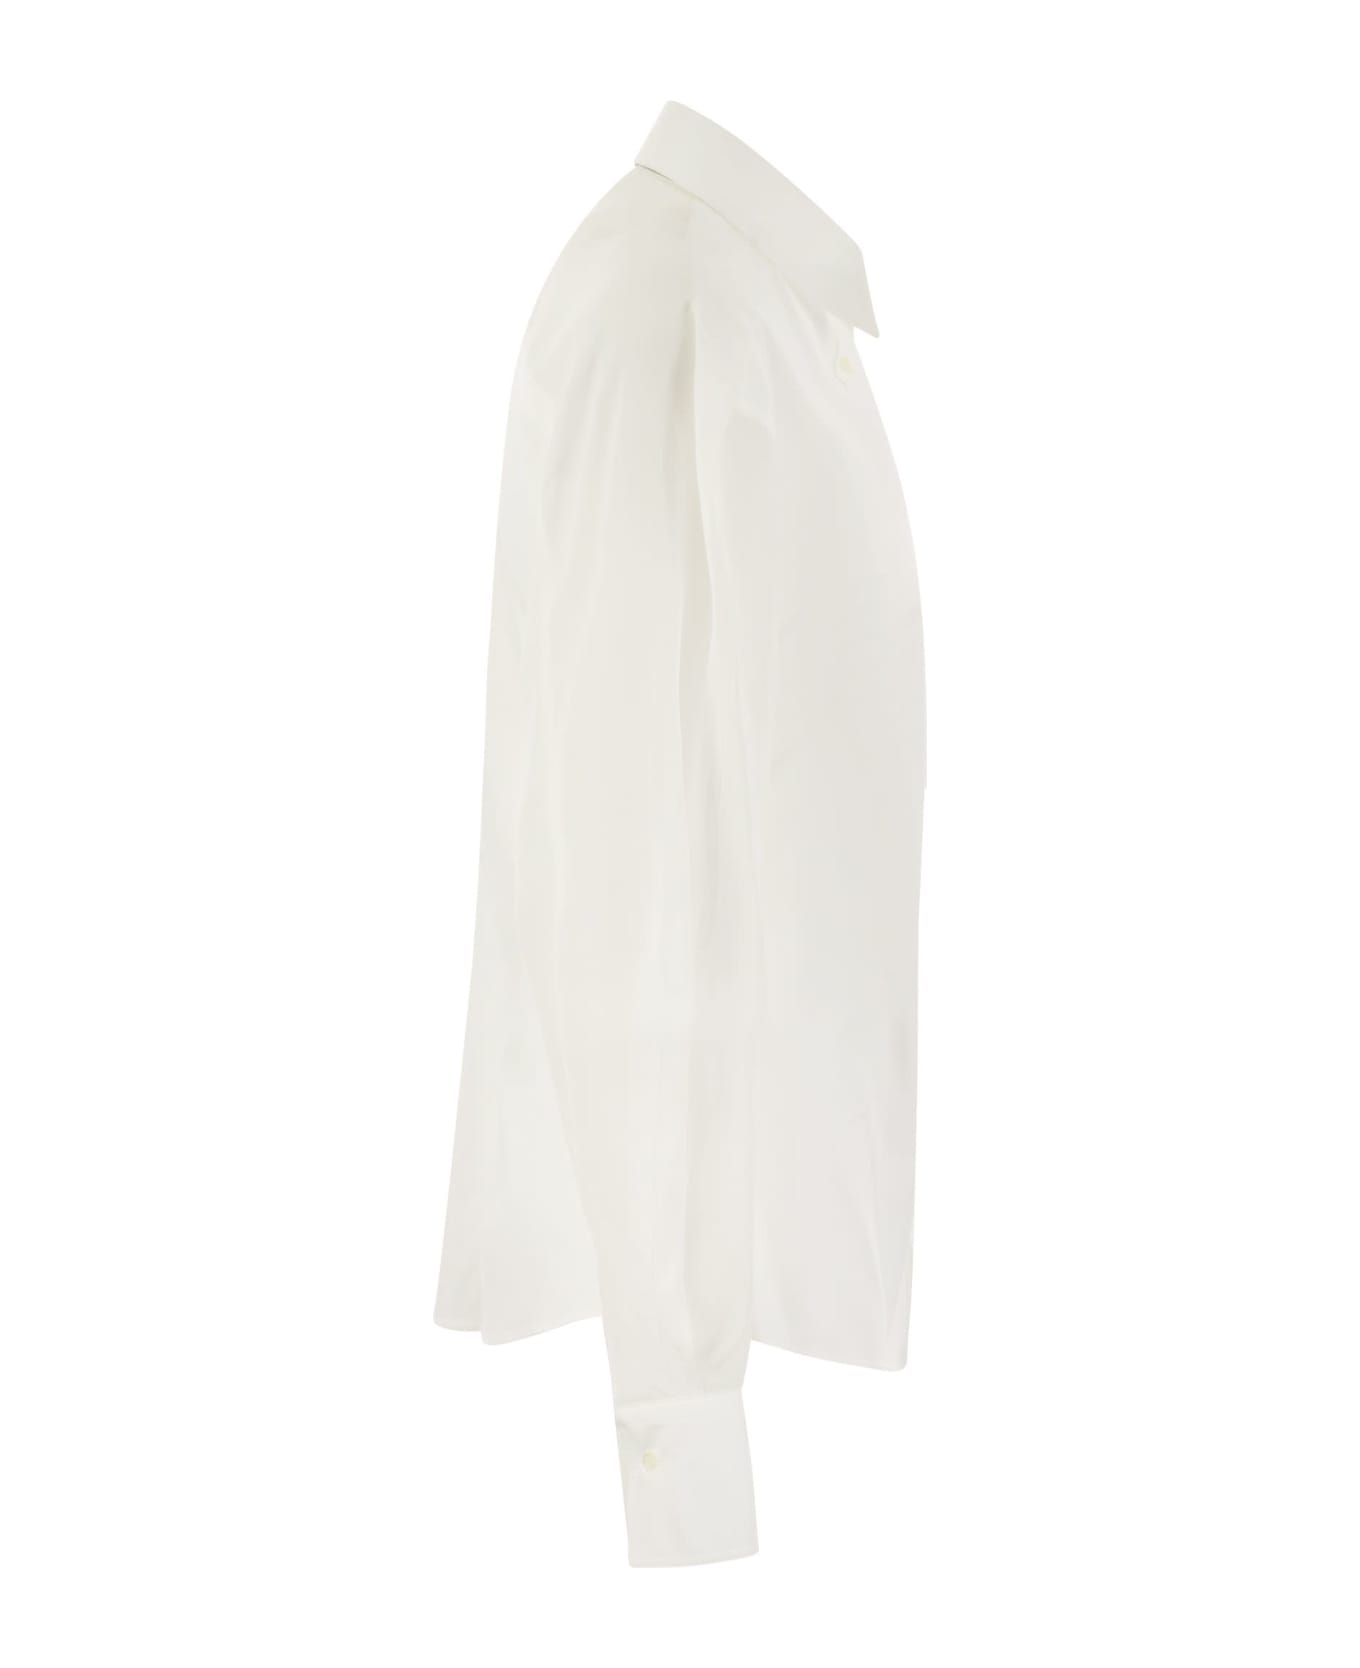 Brunello Cucinelli Stretch Cotton Poplin Shirt With Cotton Organza Sleeves And Necklace - White シャツ